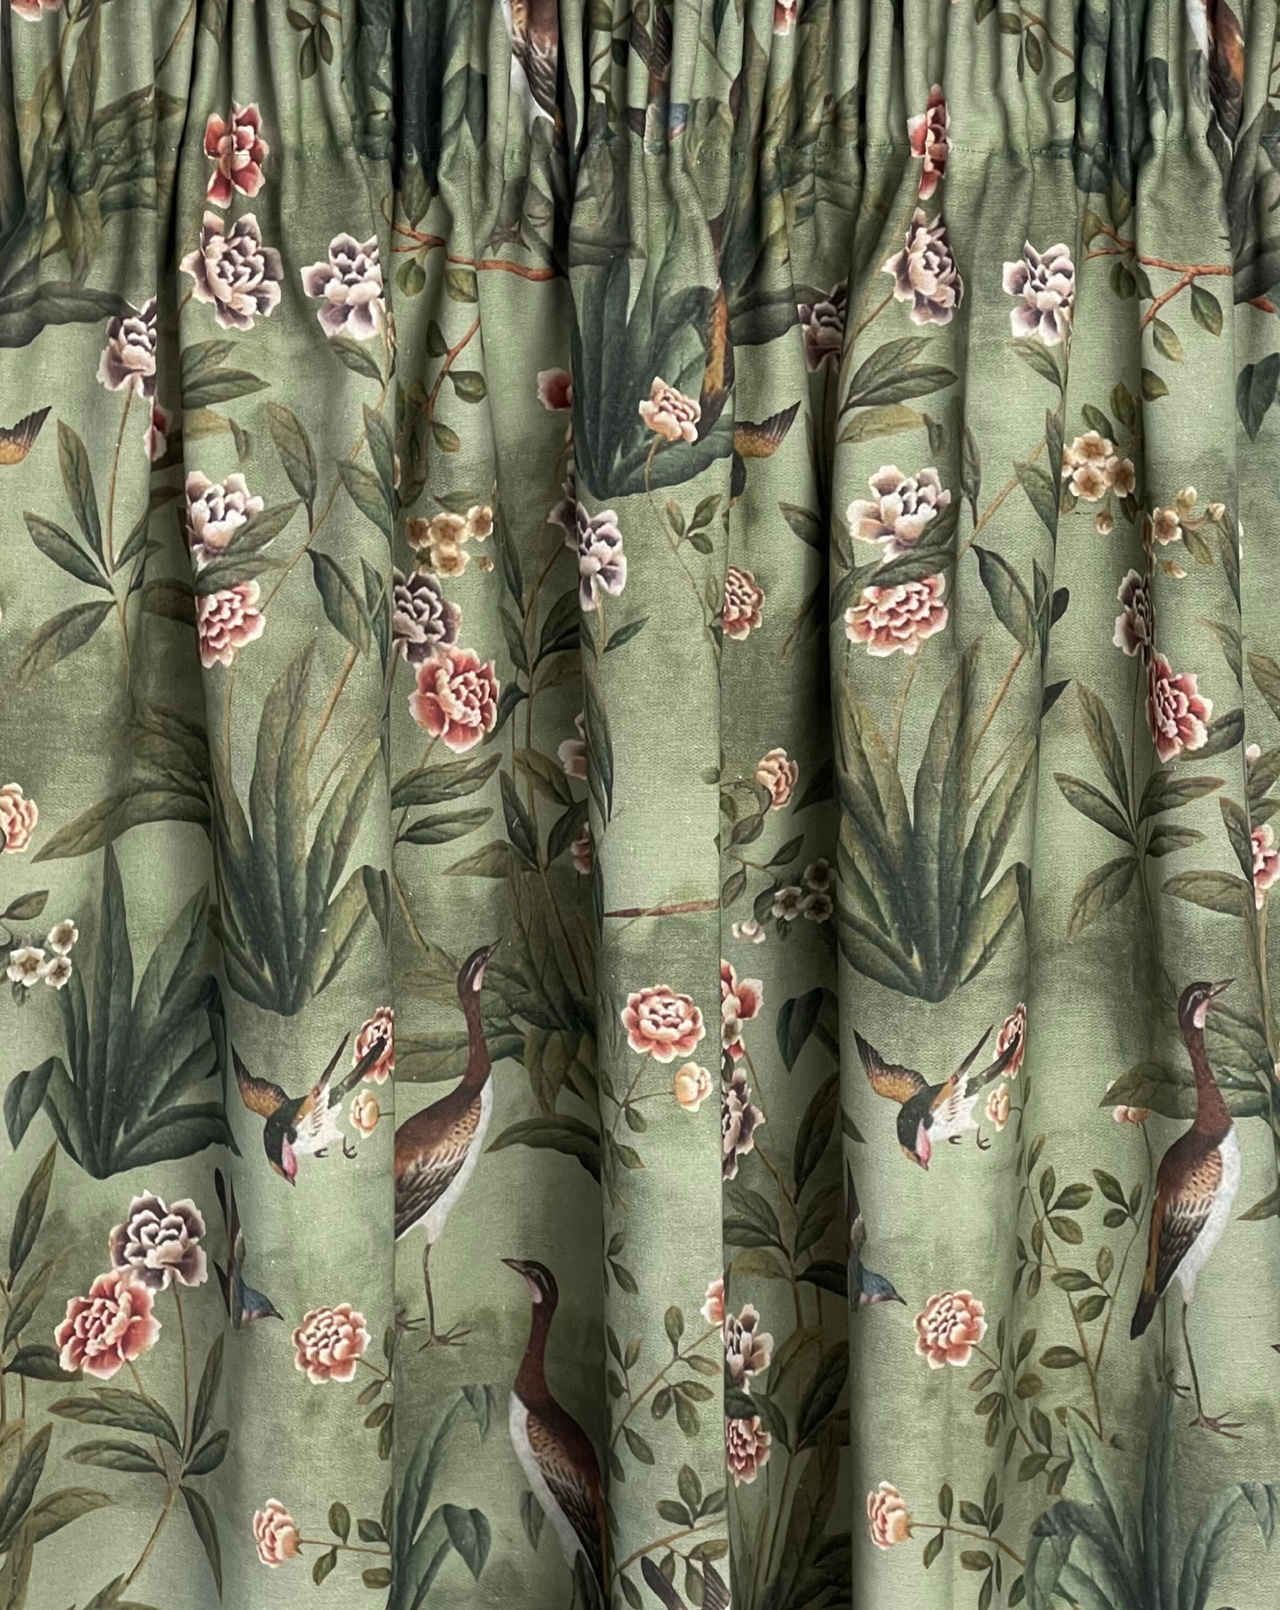 Vintage-Style Goose Botanical Cotton Curtains - Custom Made to Measure